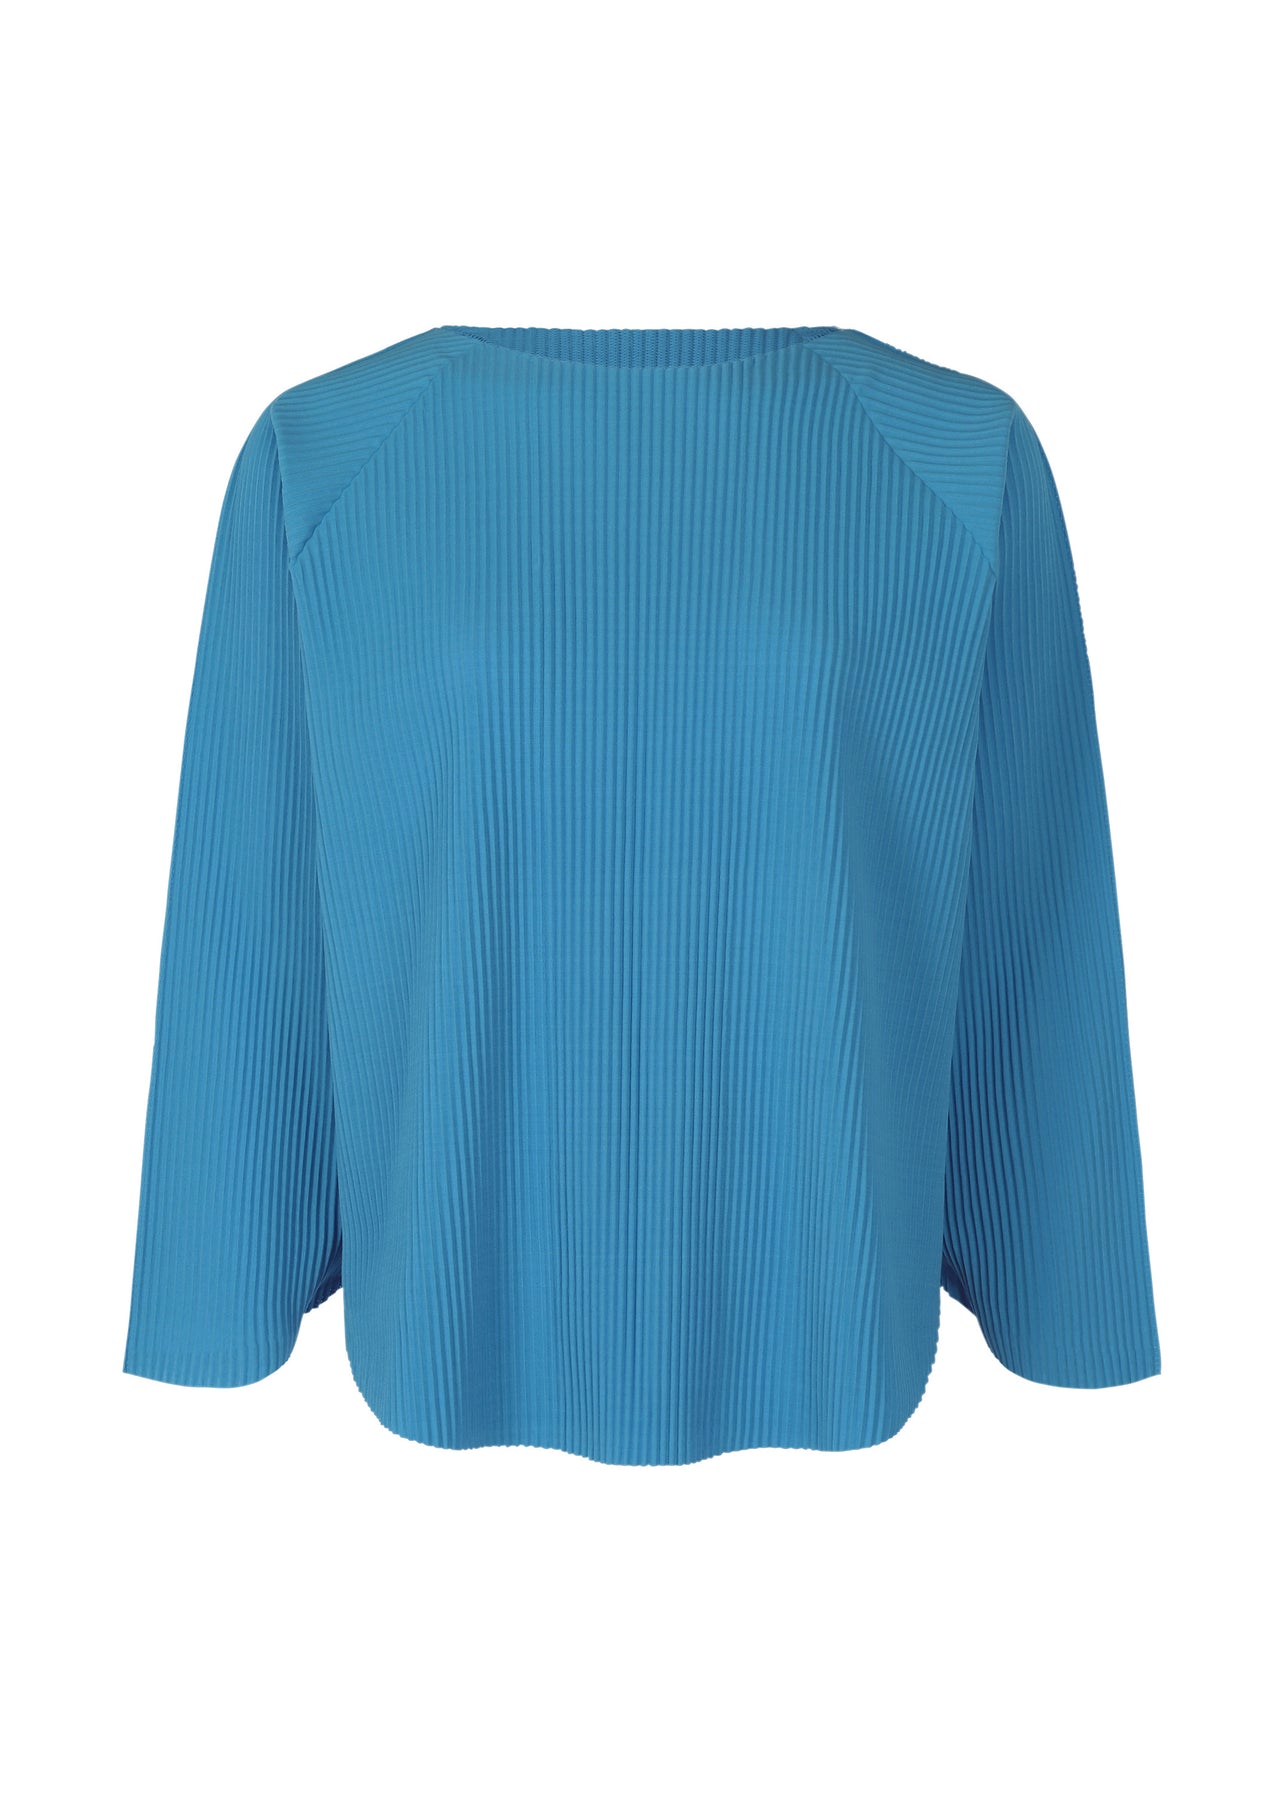 WING PLEATS TOP | The official ISSEY MIYAKE ONLINE STORE | ISSEY